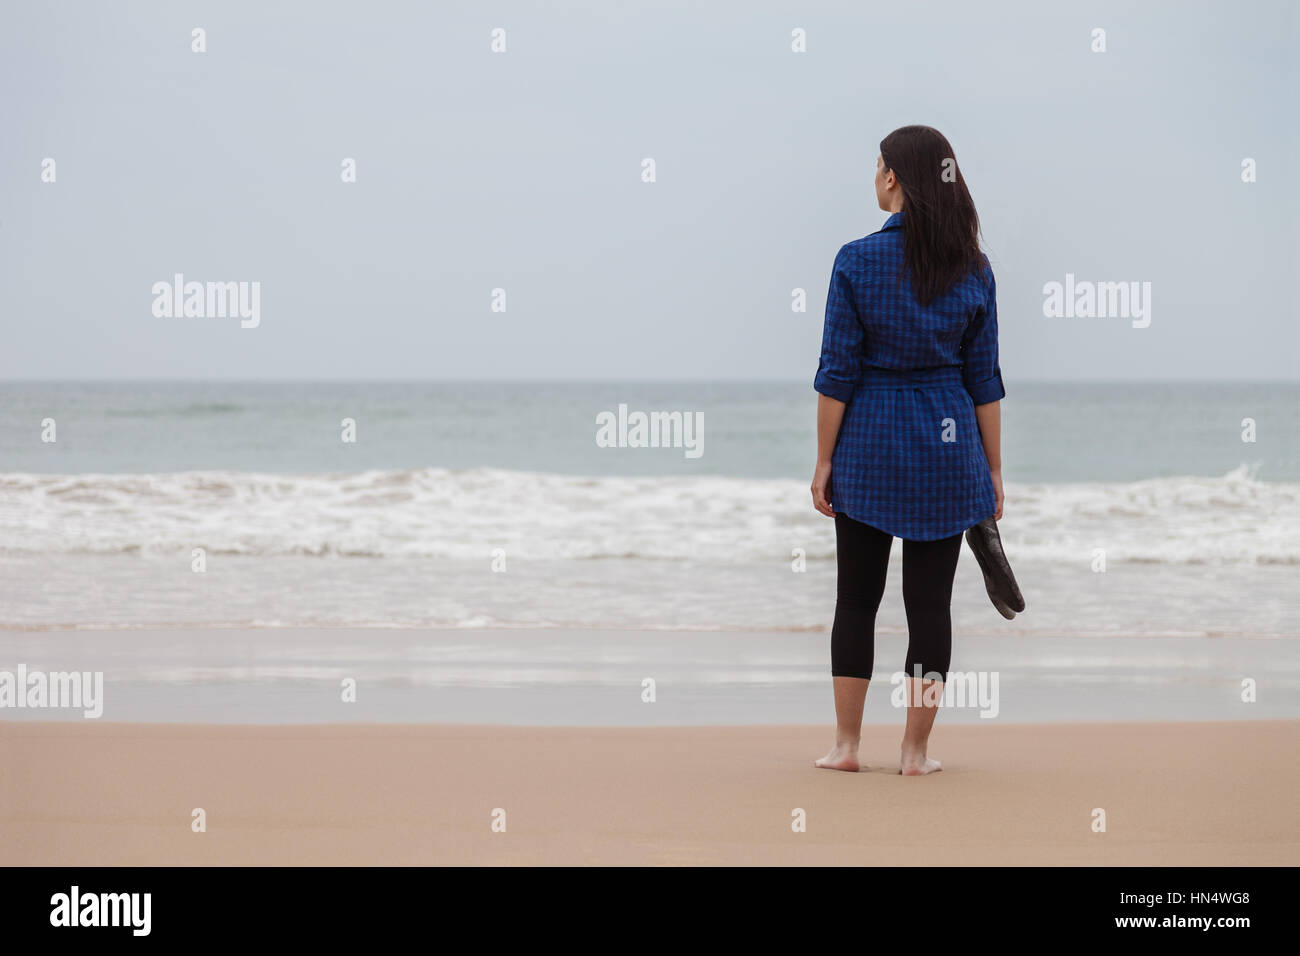 Lonely and depressed woman standing in front of the sea in a deserted beach on an Autumn day / woman beach alone lonely sad sadness depressed Stock Photo